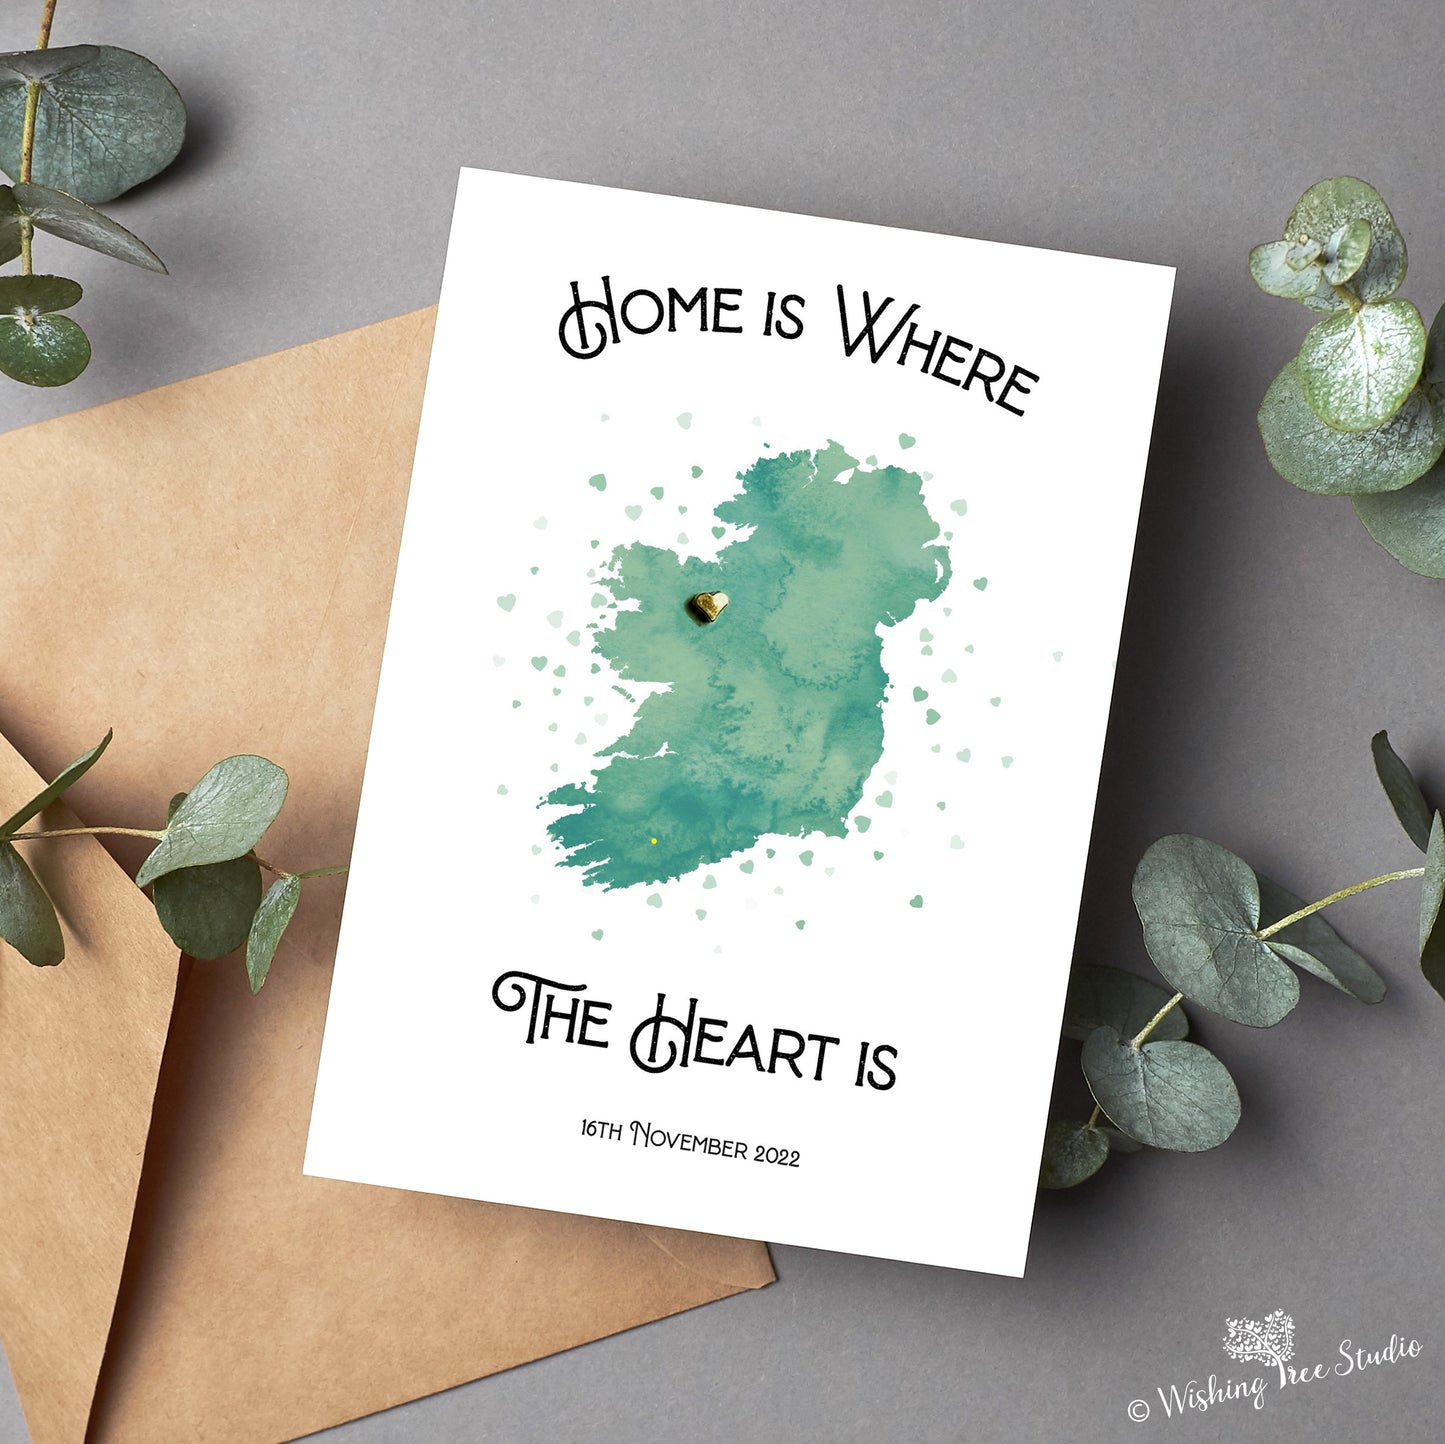 Home is where the Heart is map greeting card